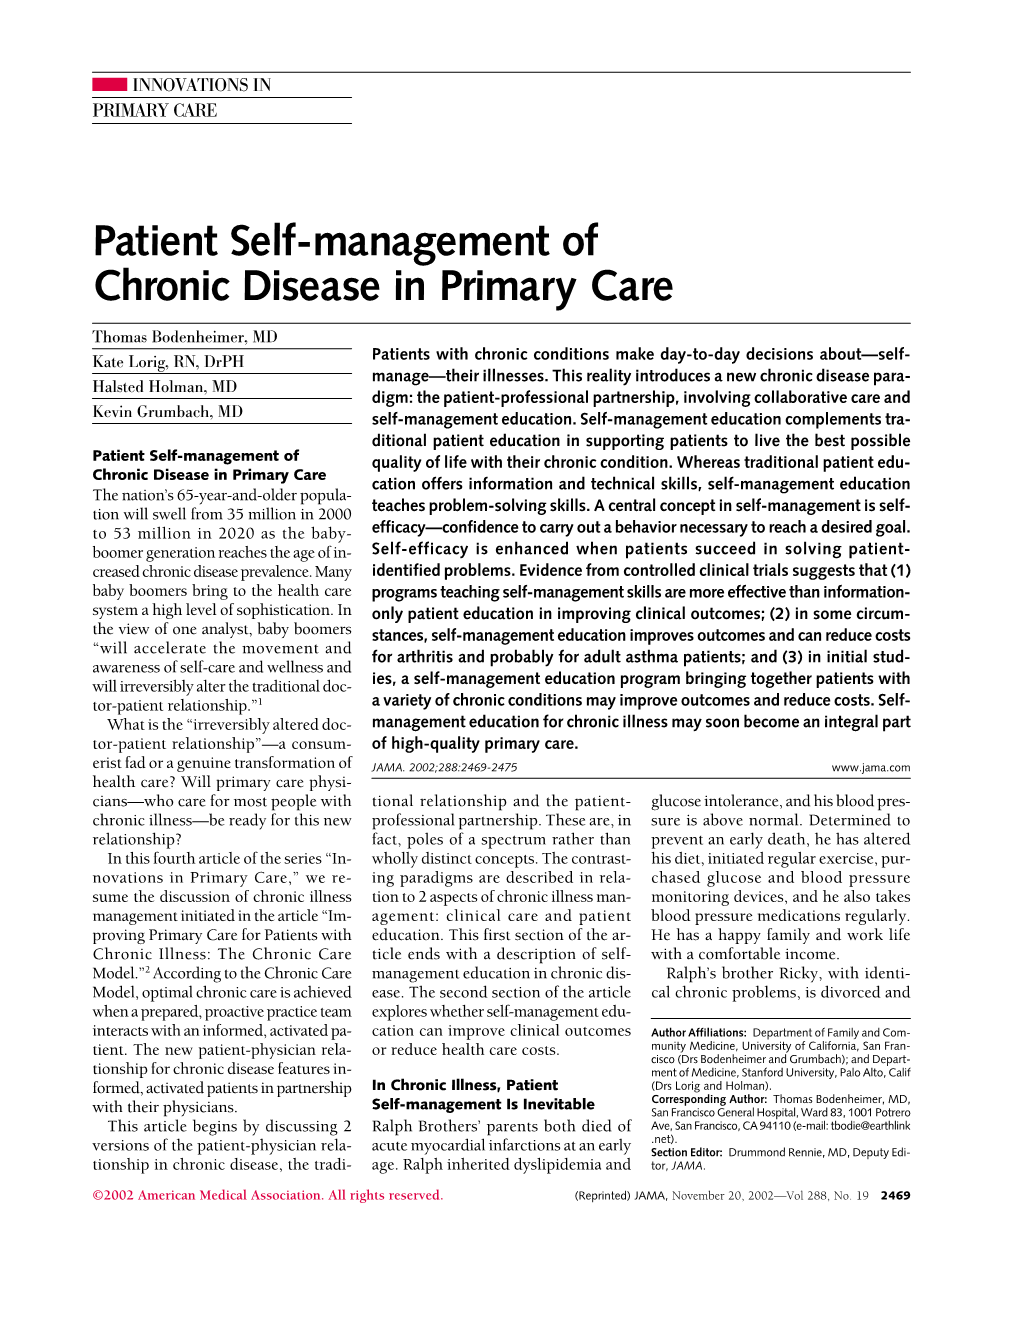 Patient Self-Management of Chronic Disease in Primary Care